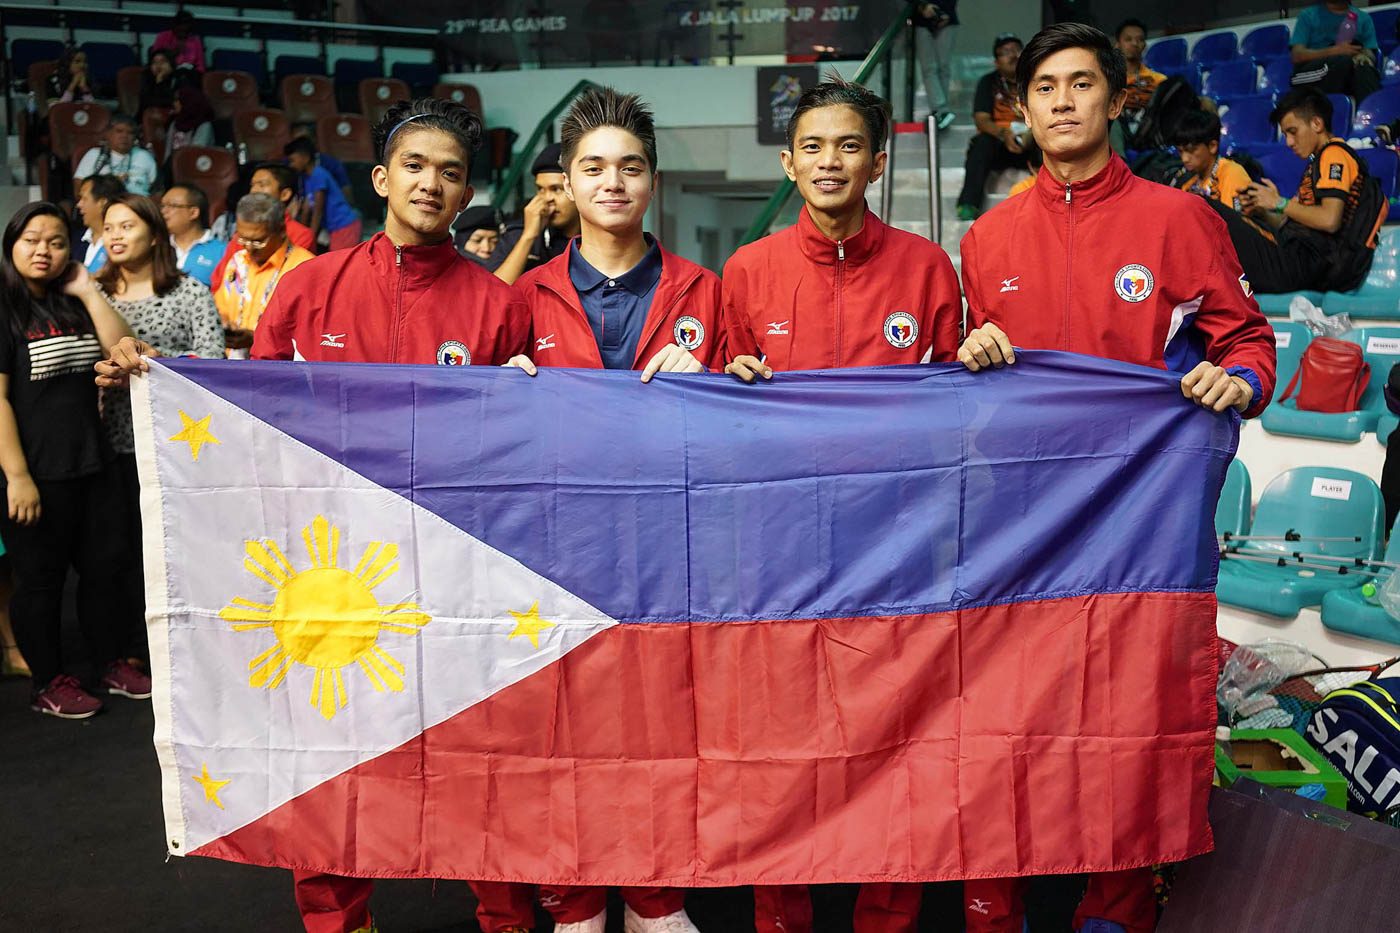 Exhausted but still fighting, PH men’s squash team claims SEA Games silver